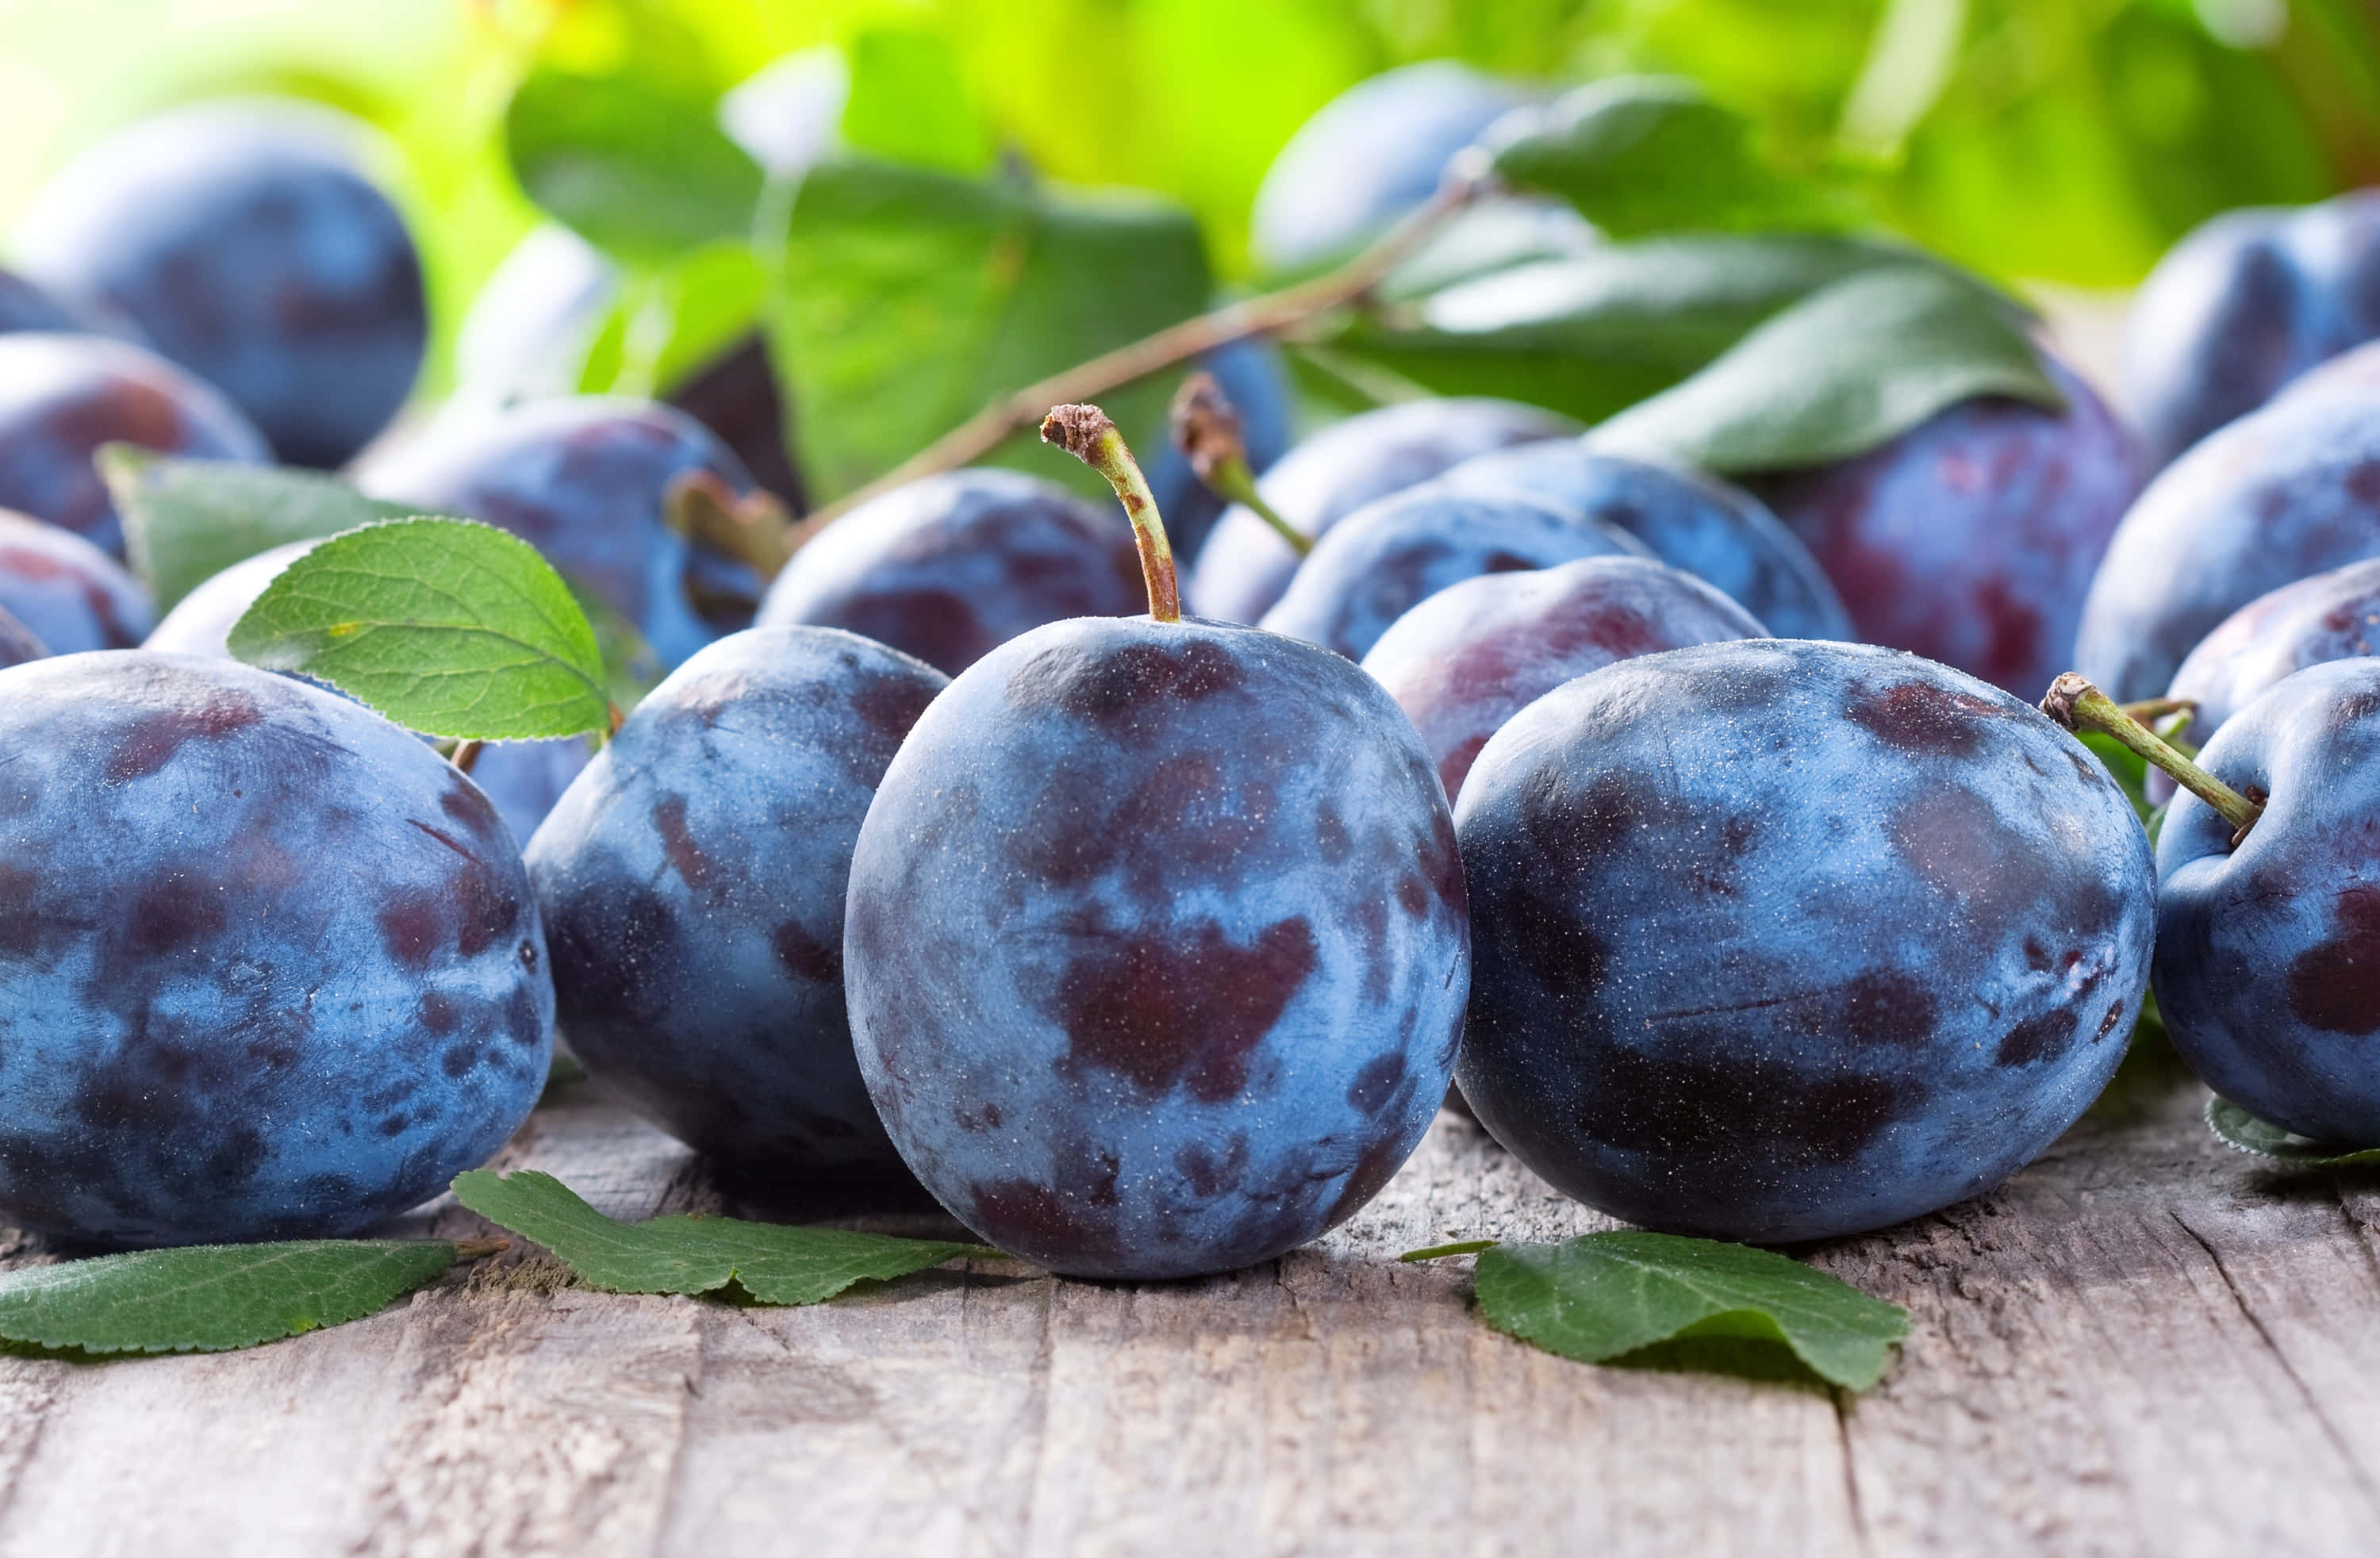 Juicy purple plums, ripened to perfection Wallpaper